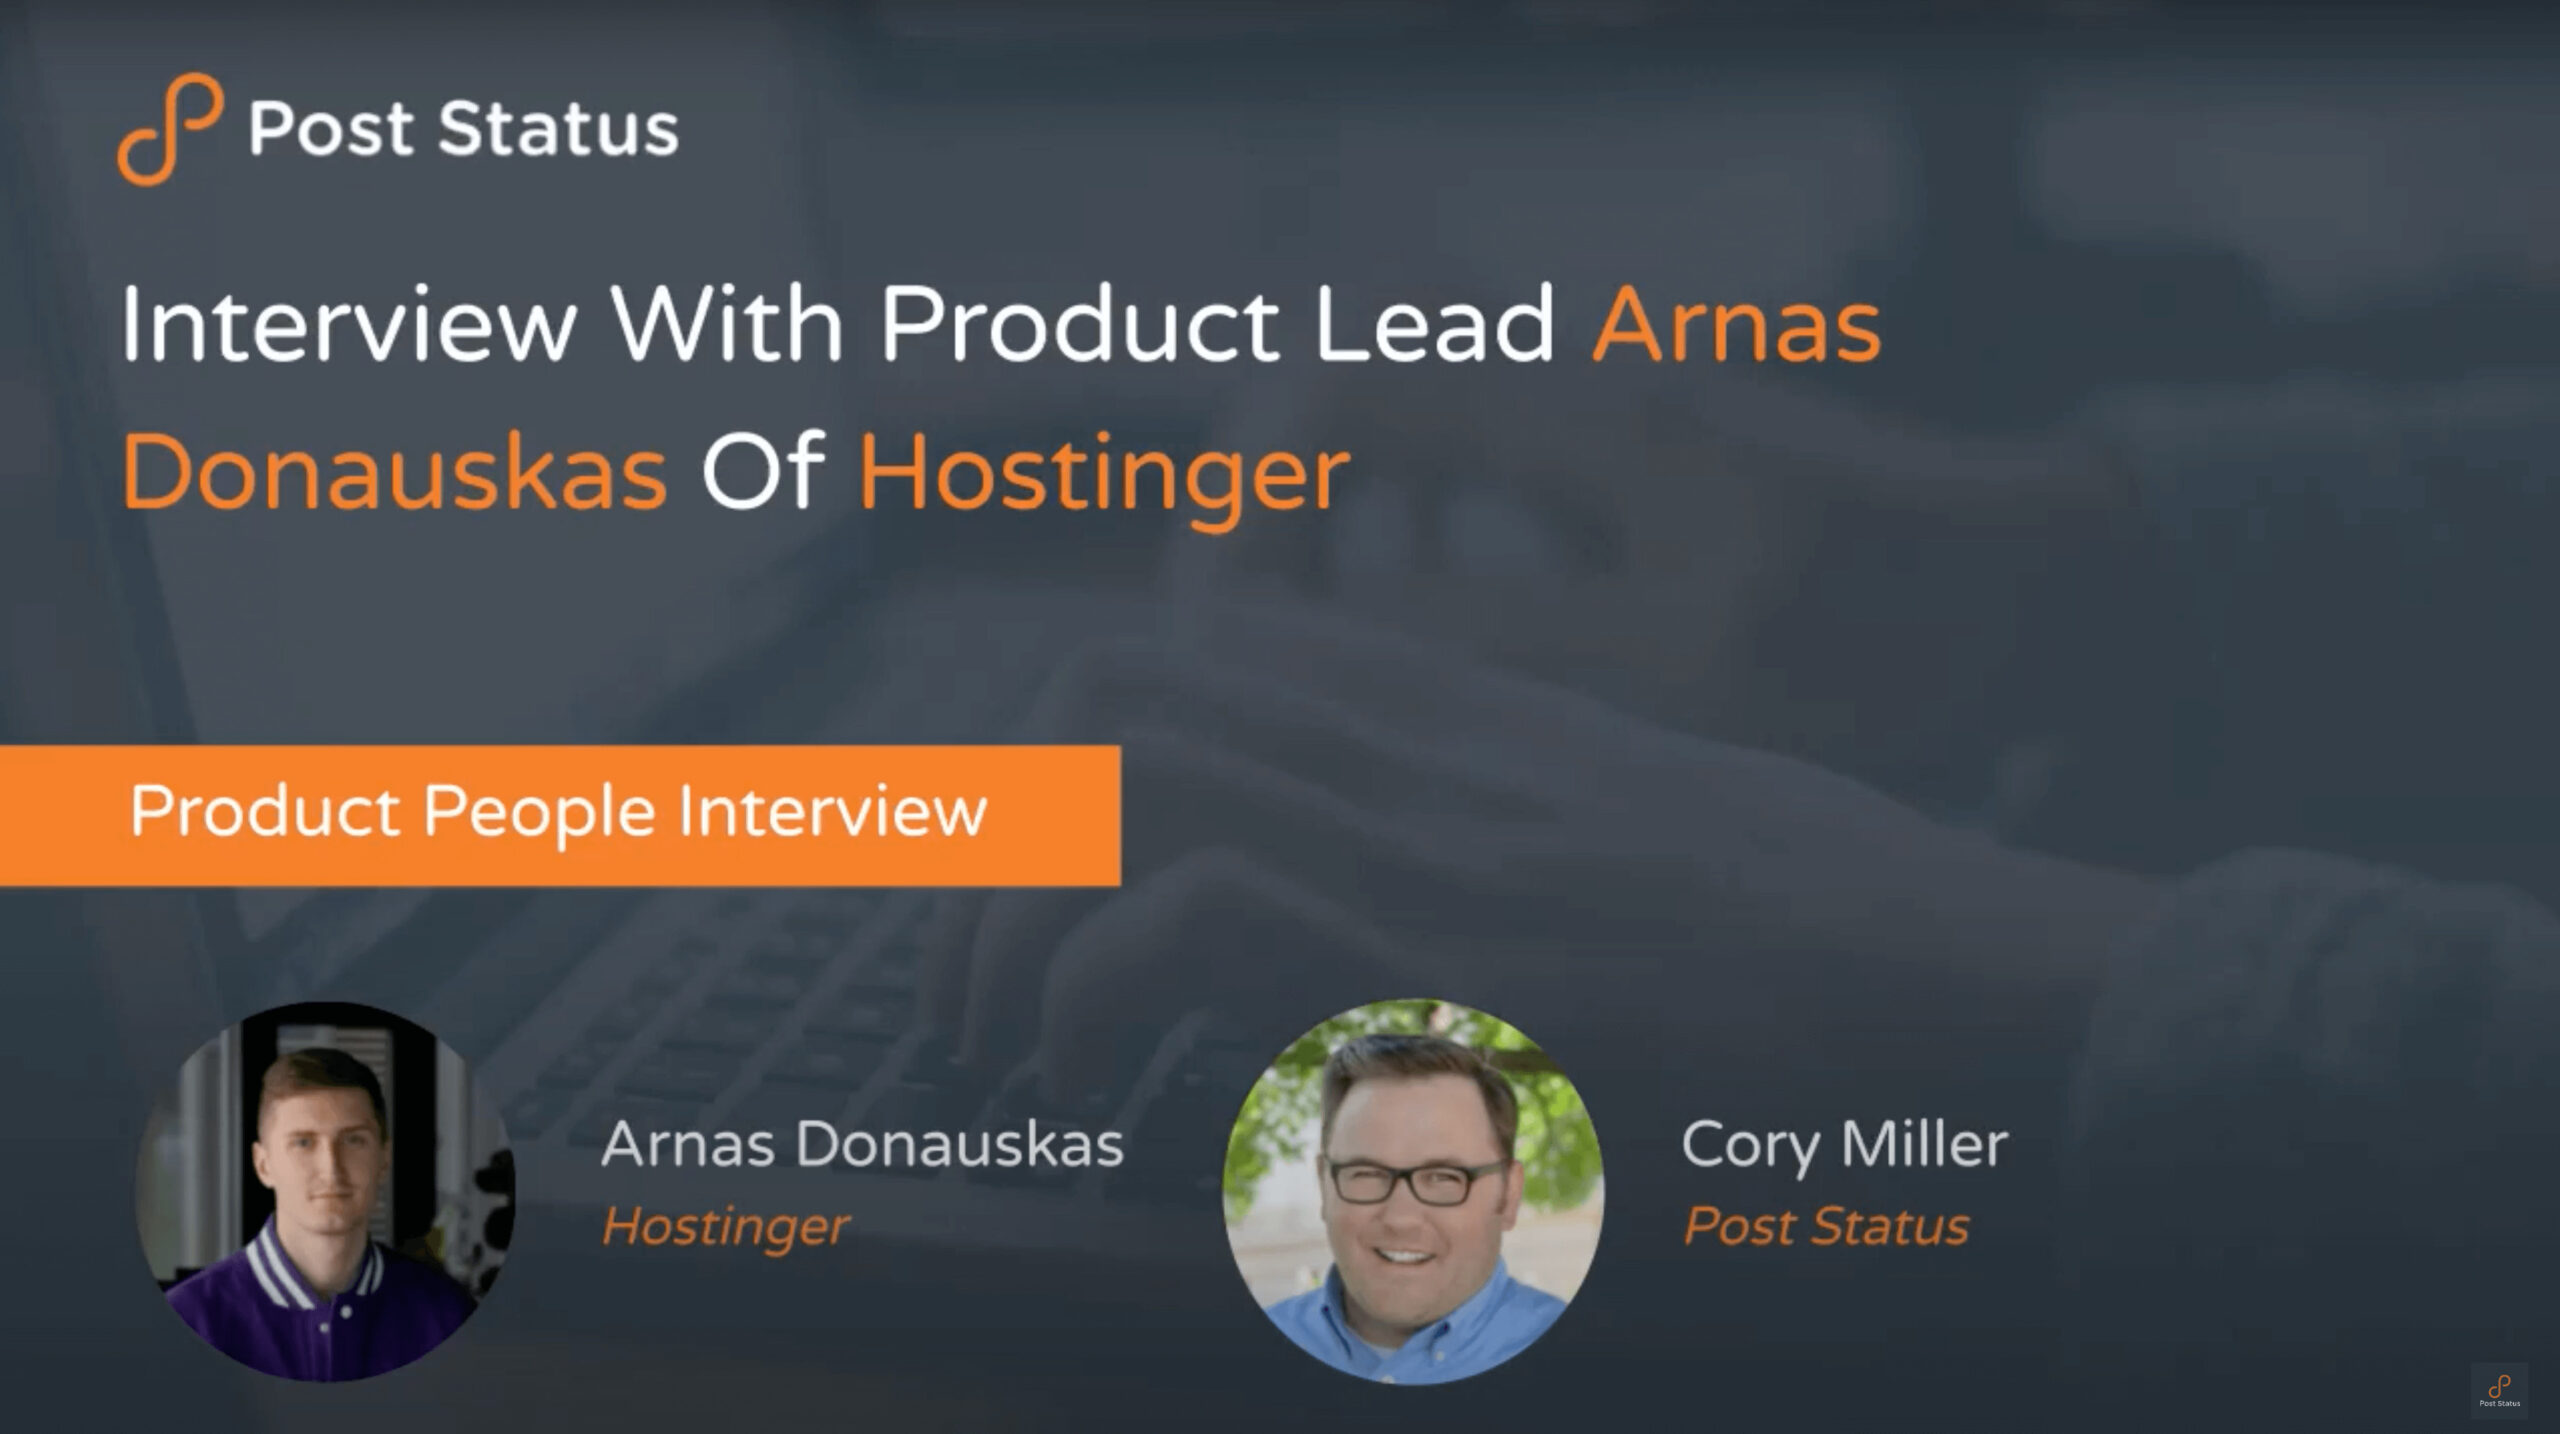 Interview with Product Lead Arnas Donauskas of Hostinger with Cory Miller